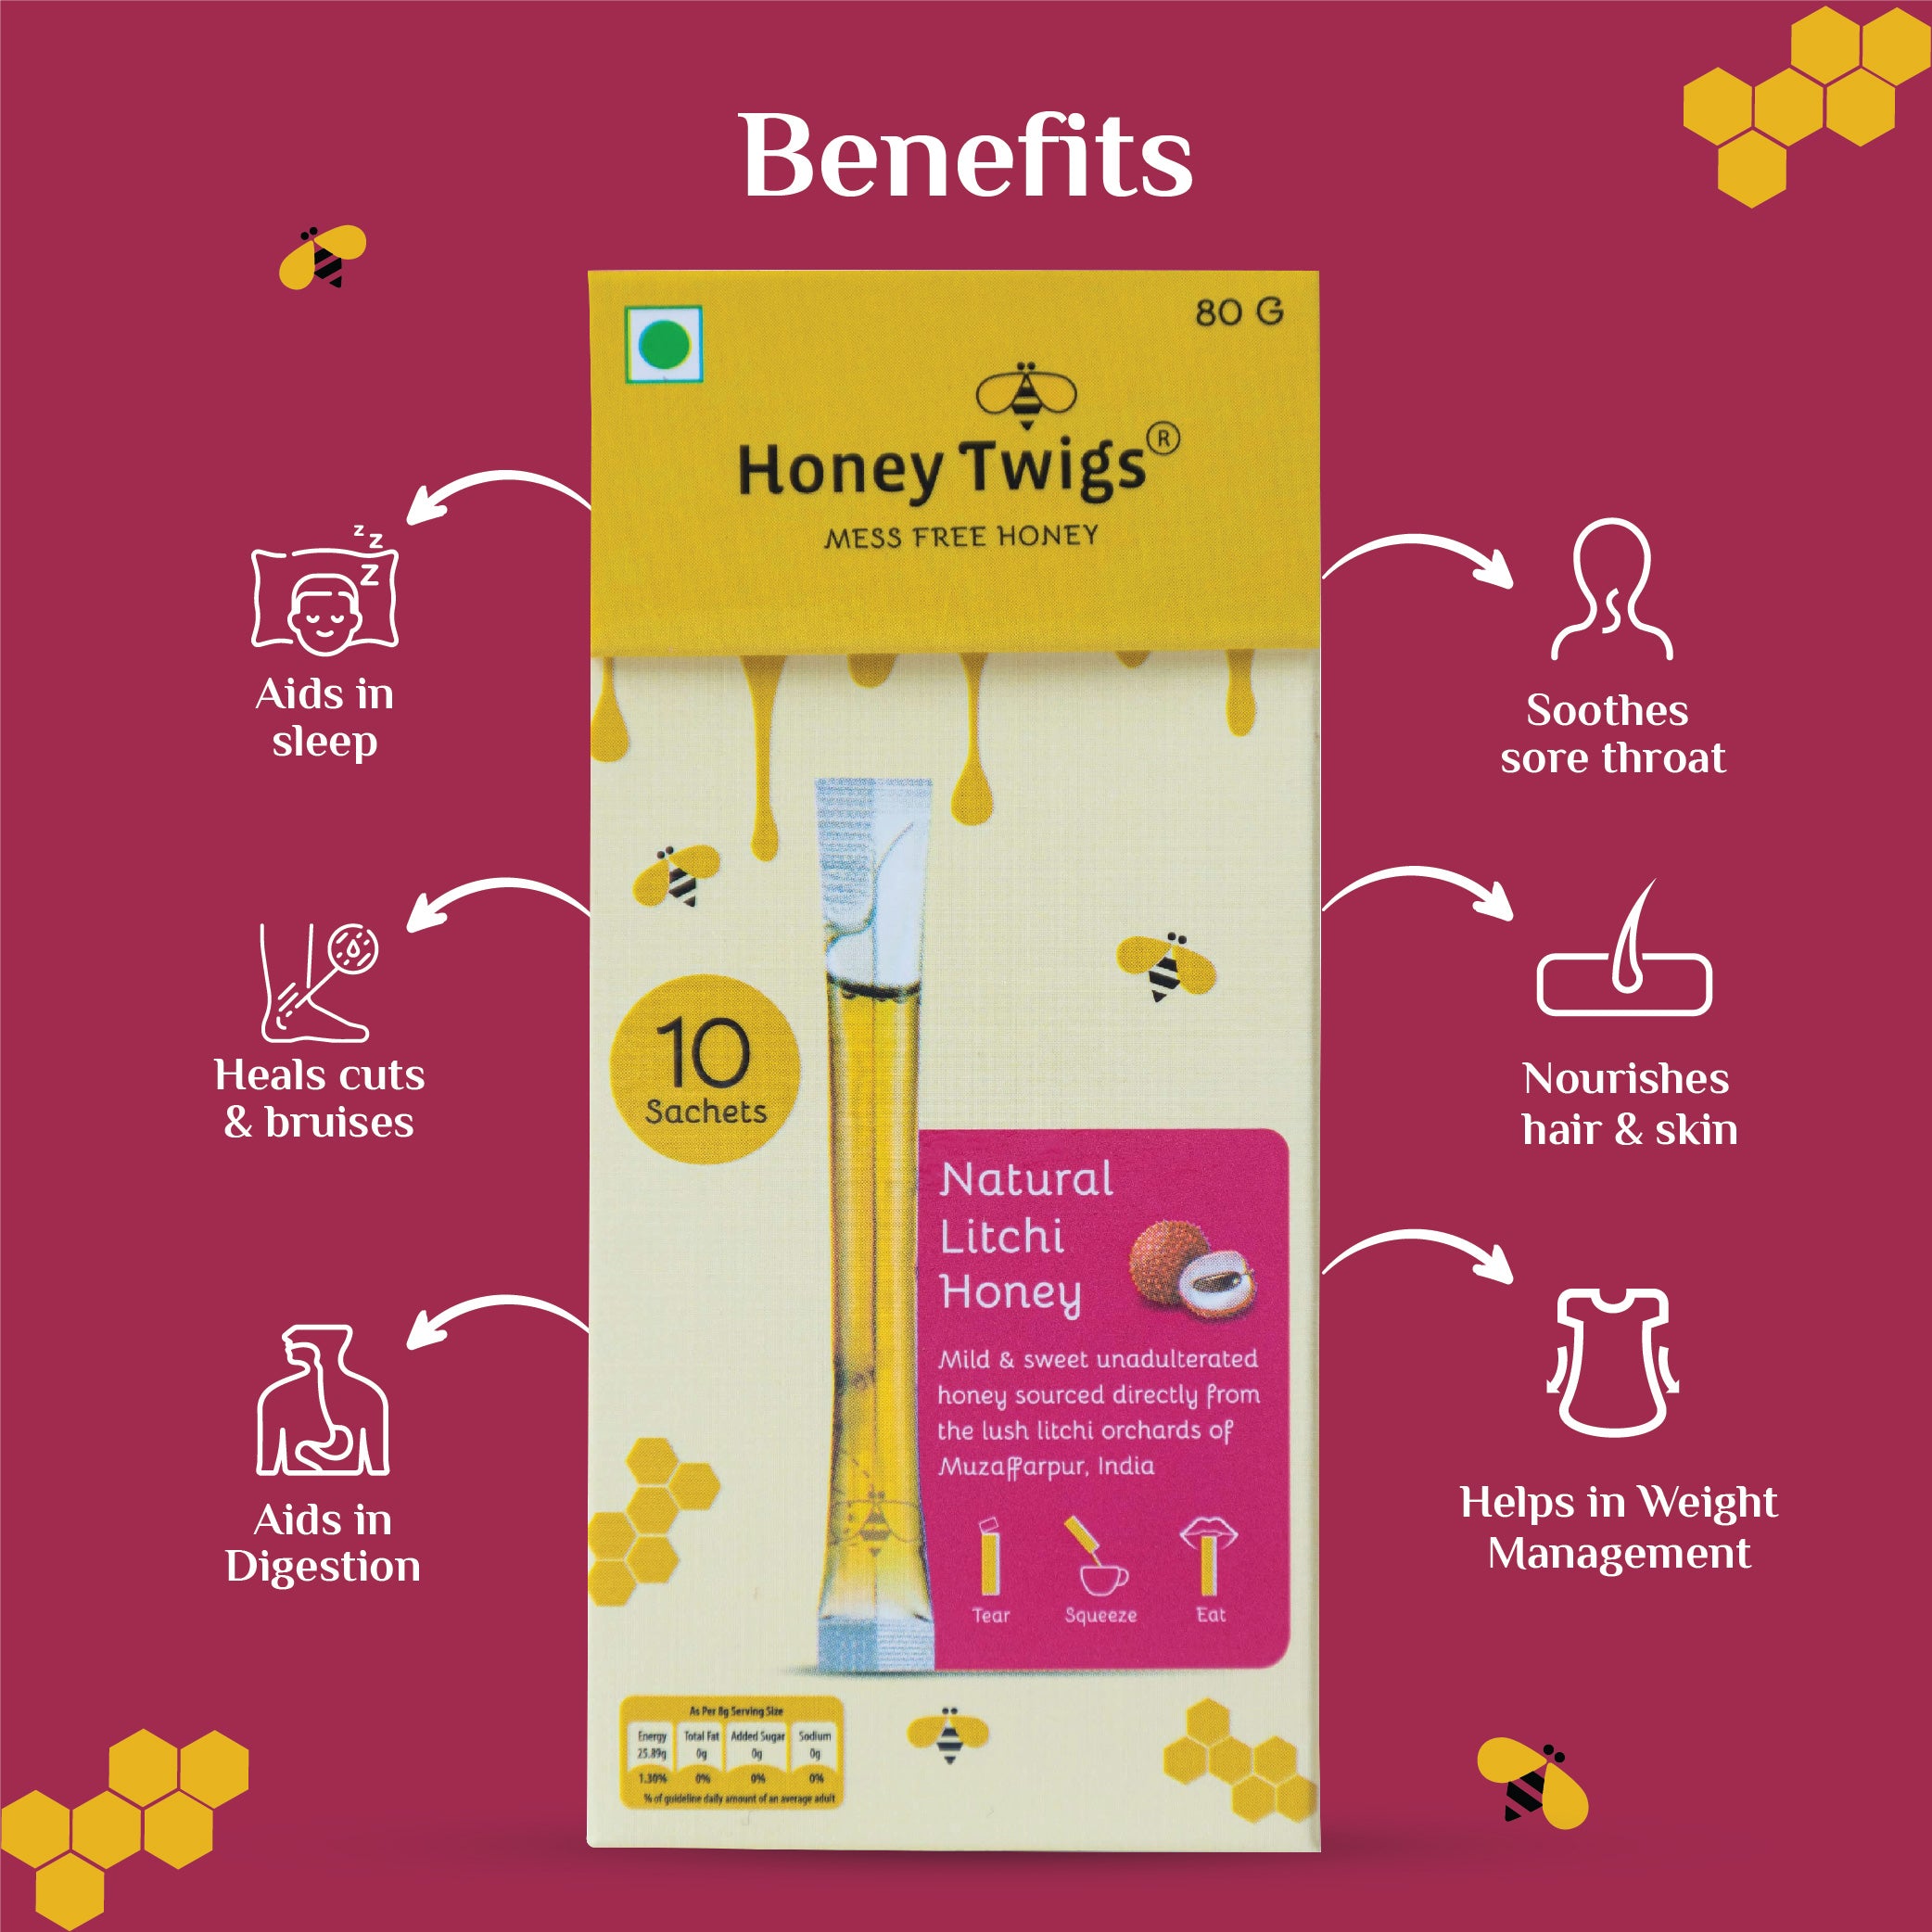 HONEY TWIGS Natural Litchi Honey, 80g - Pack of 10 Sachets